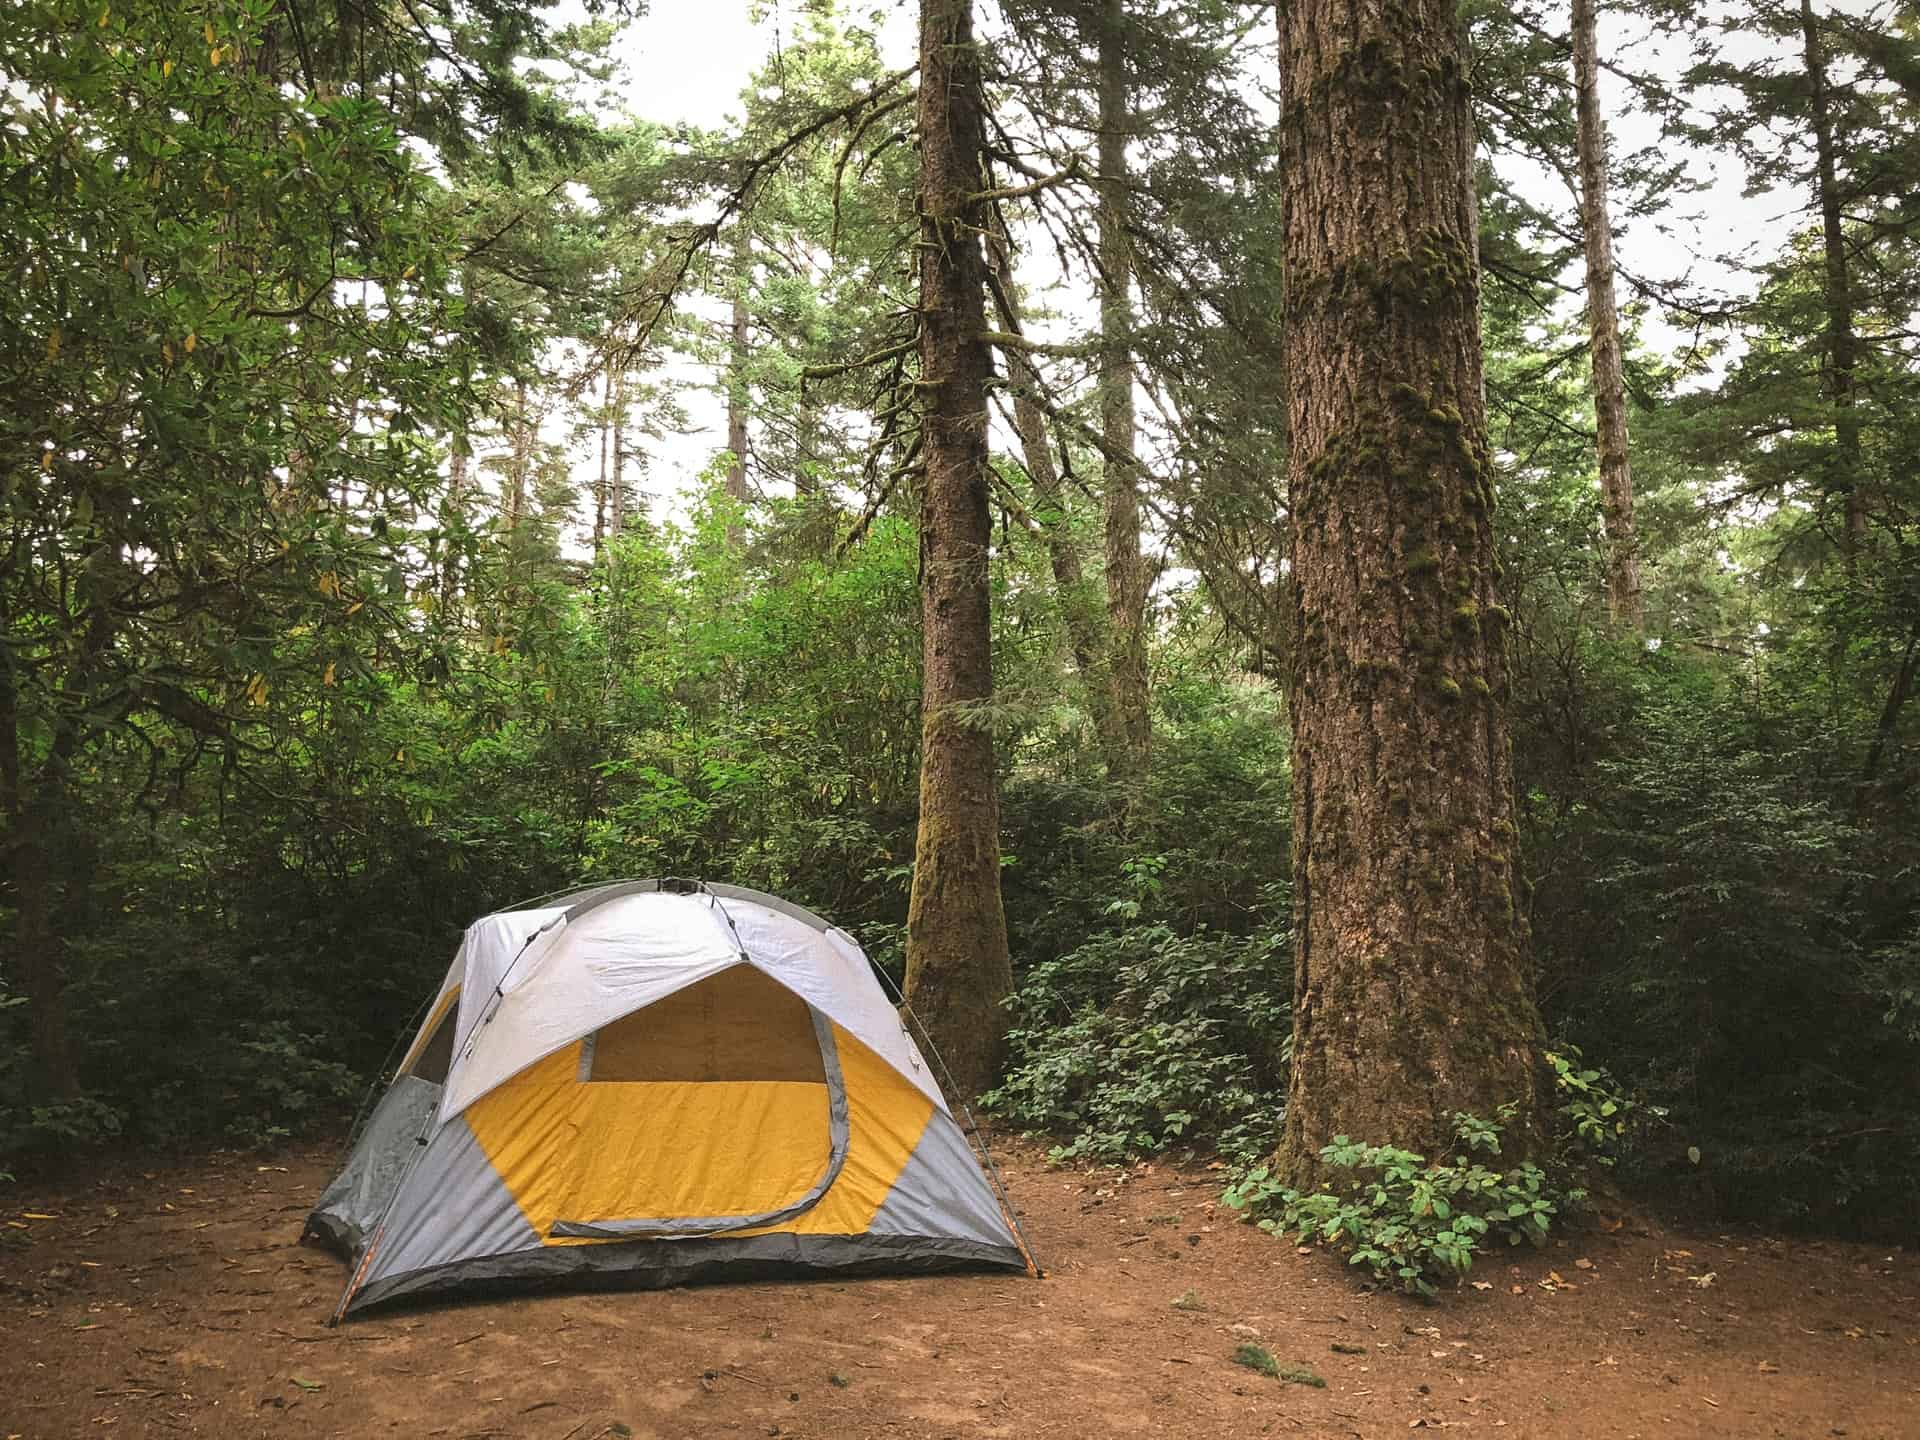 What to take in a tent? Editor’s essentials list